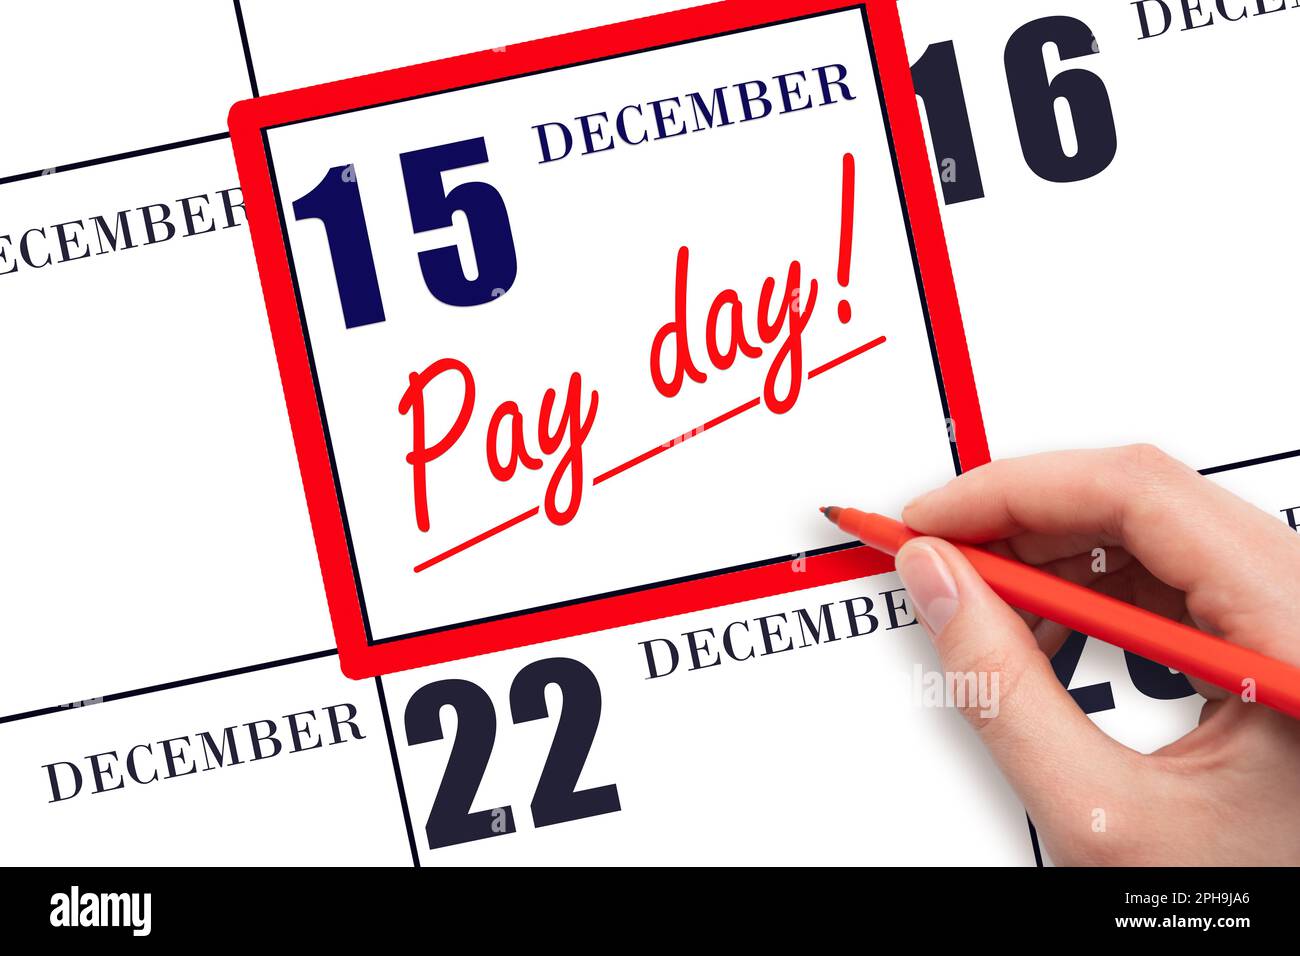 15th day of December. Hand writing text PAY DATE on calendar date December 15 and underline it. Payment due date. Reminder concept of payment. Winter Stock Photo